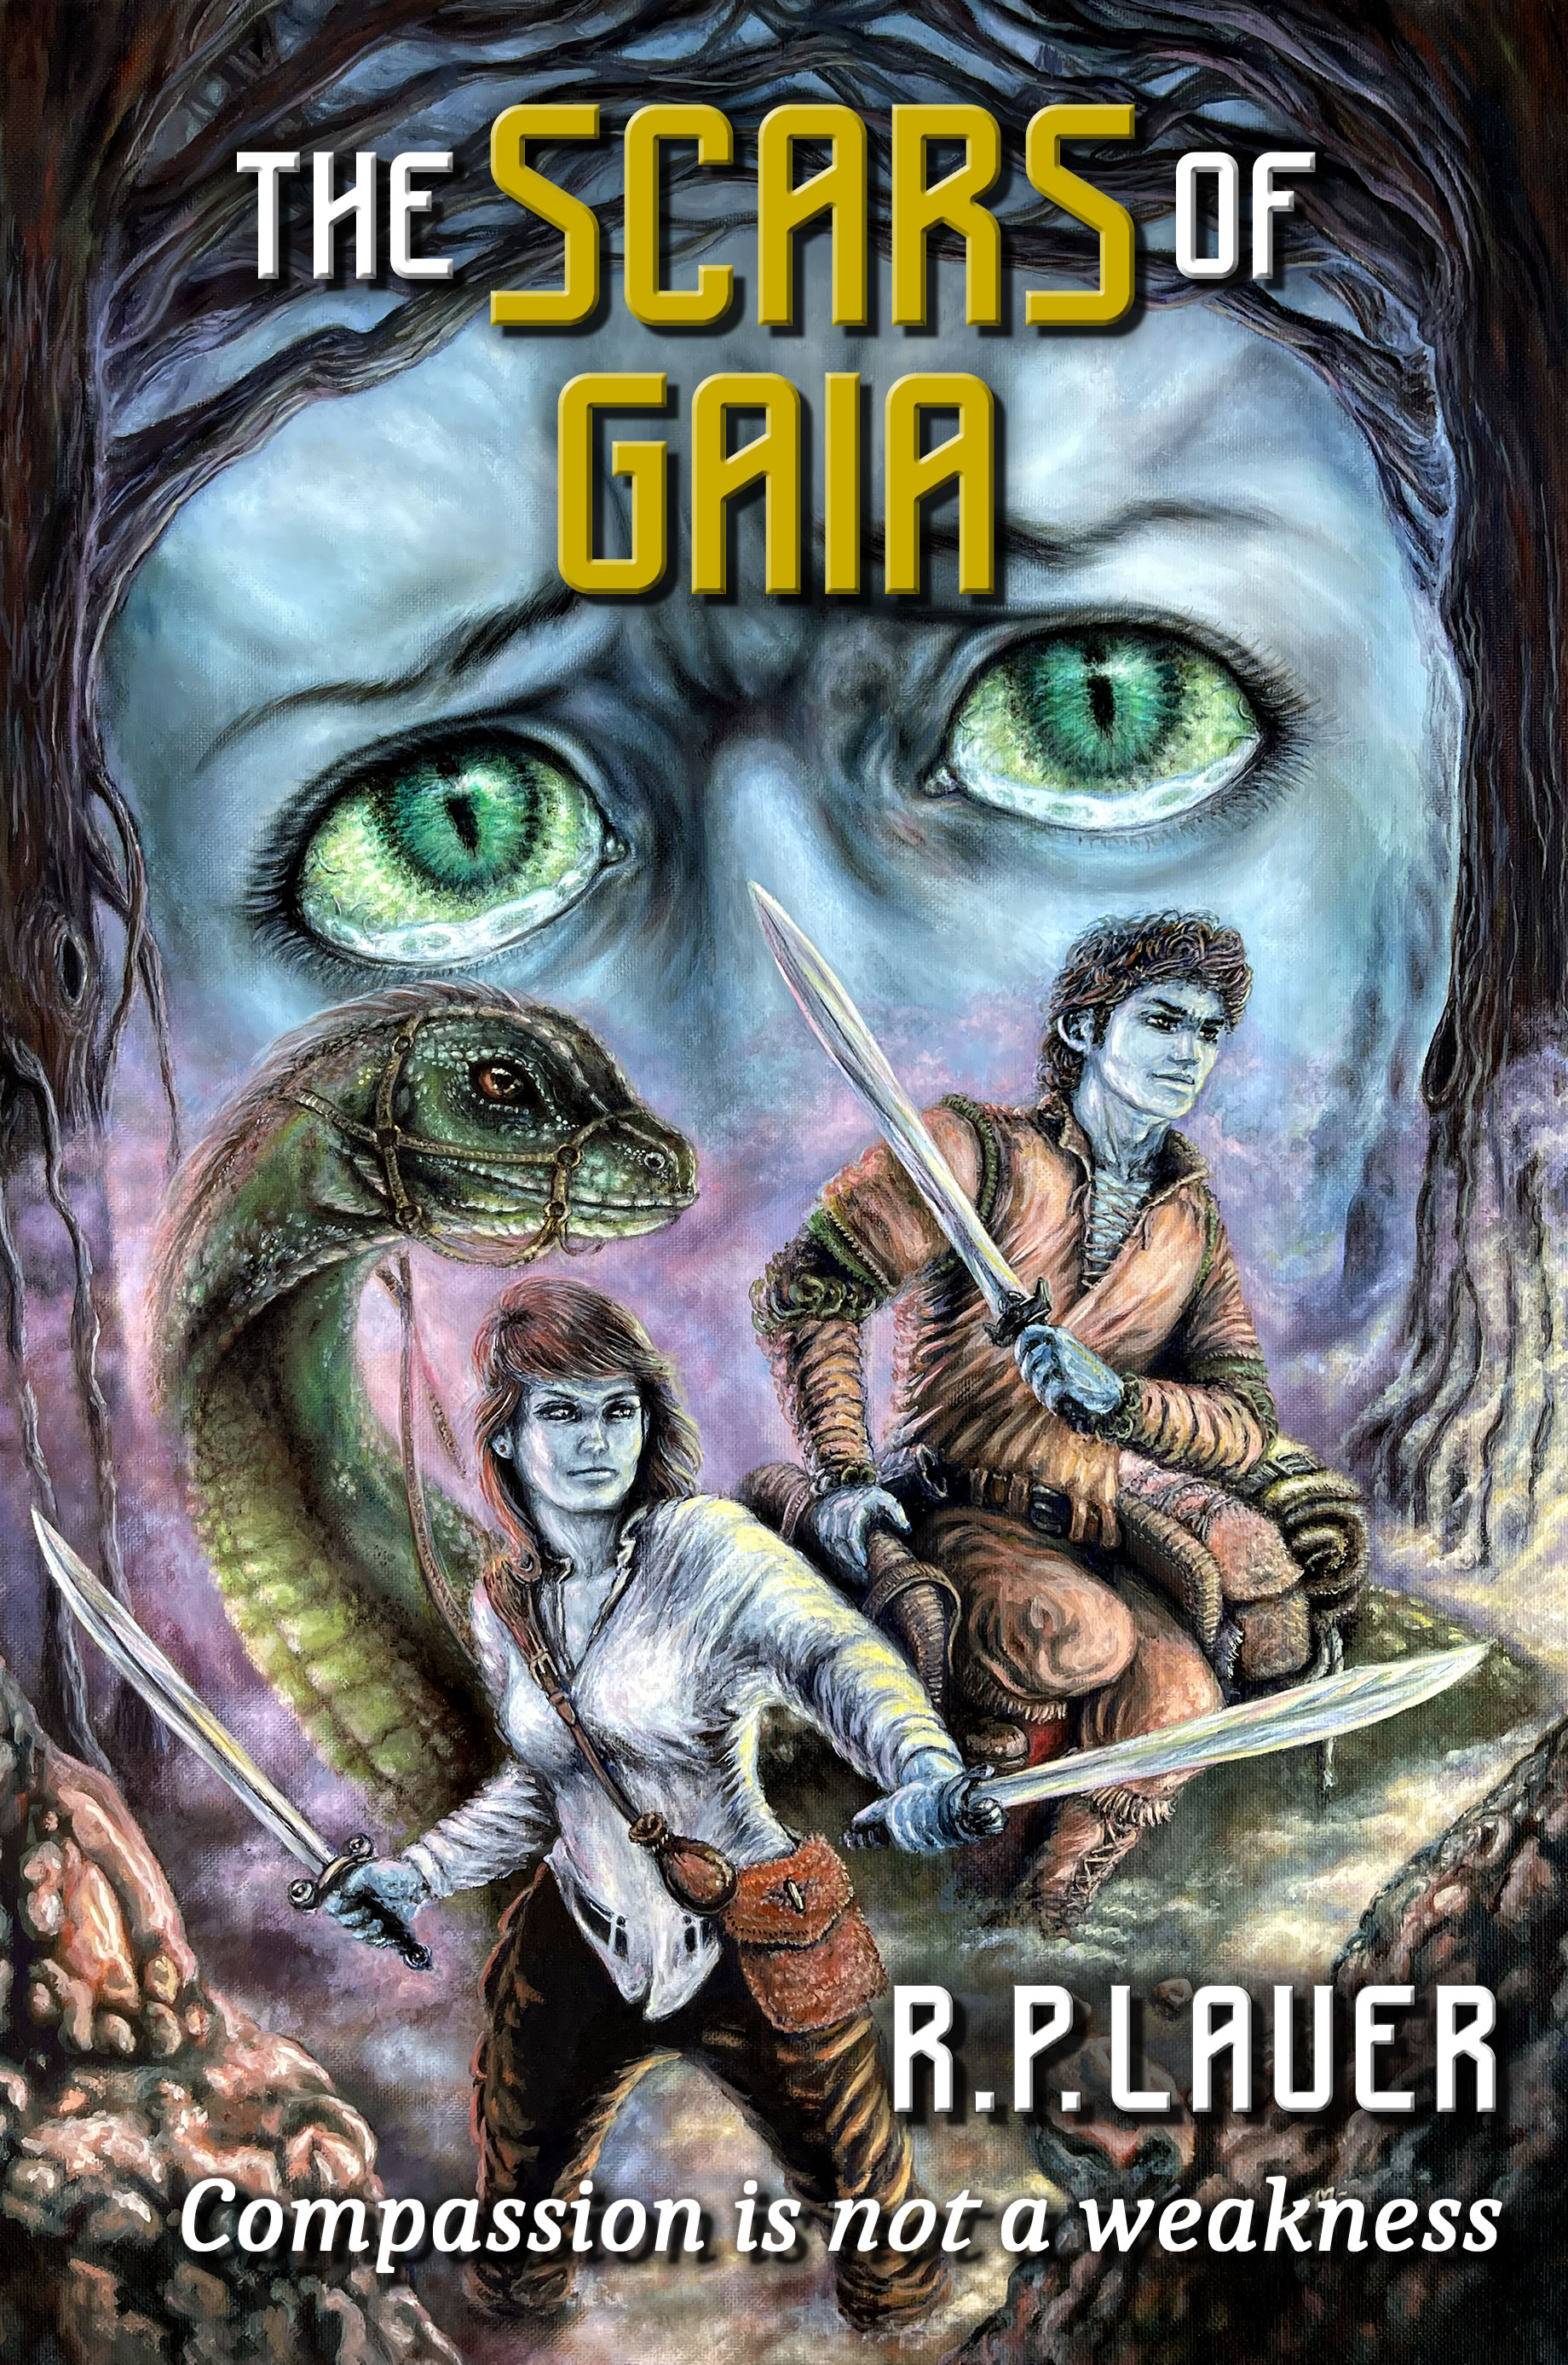 The Scars Of Gaia by R.P. Lauer